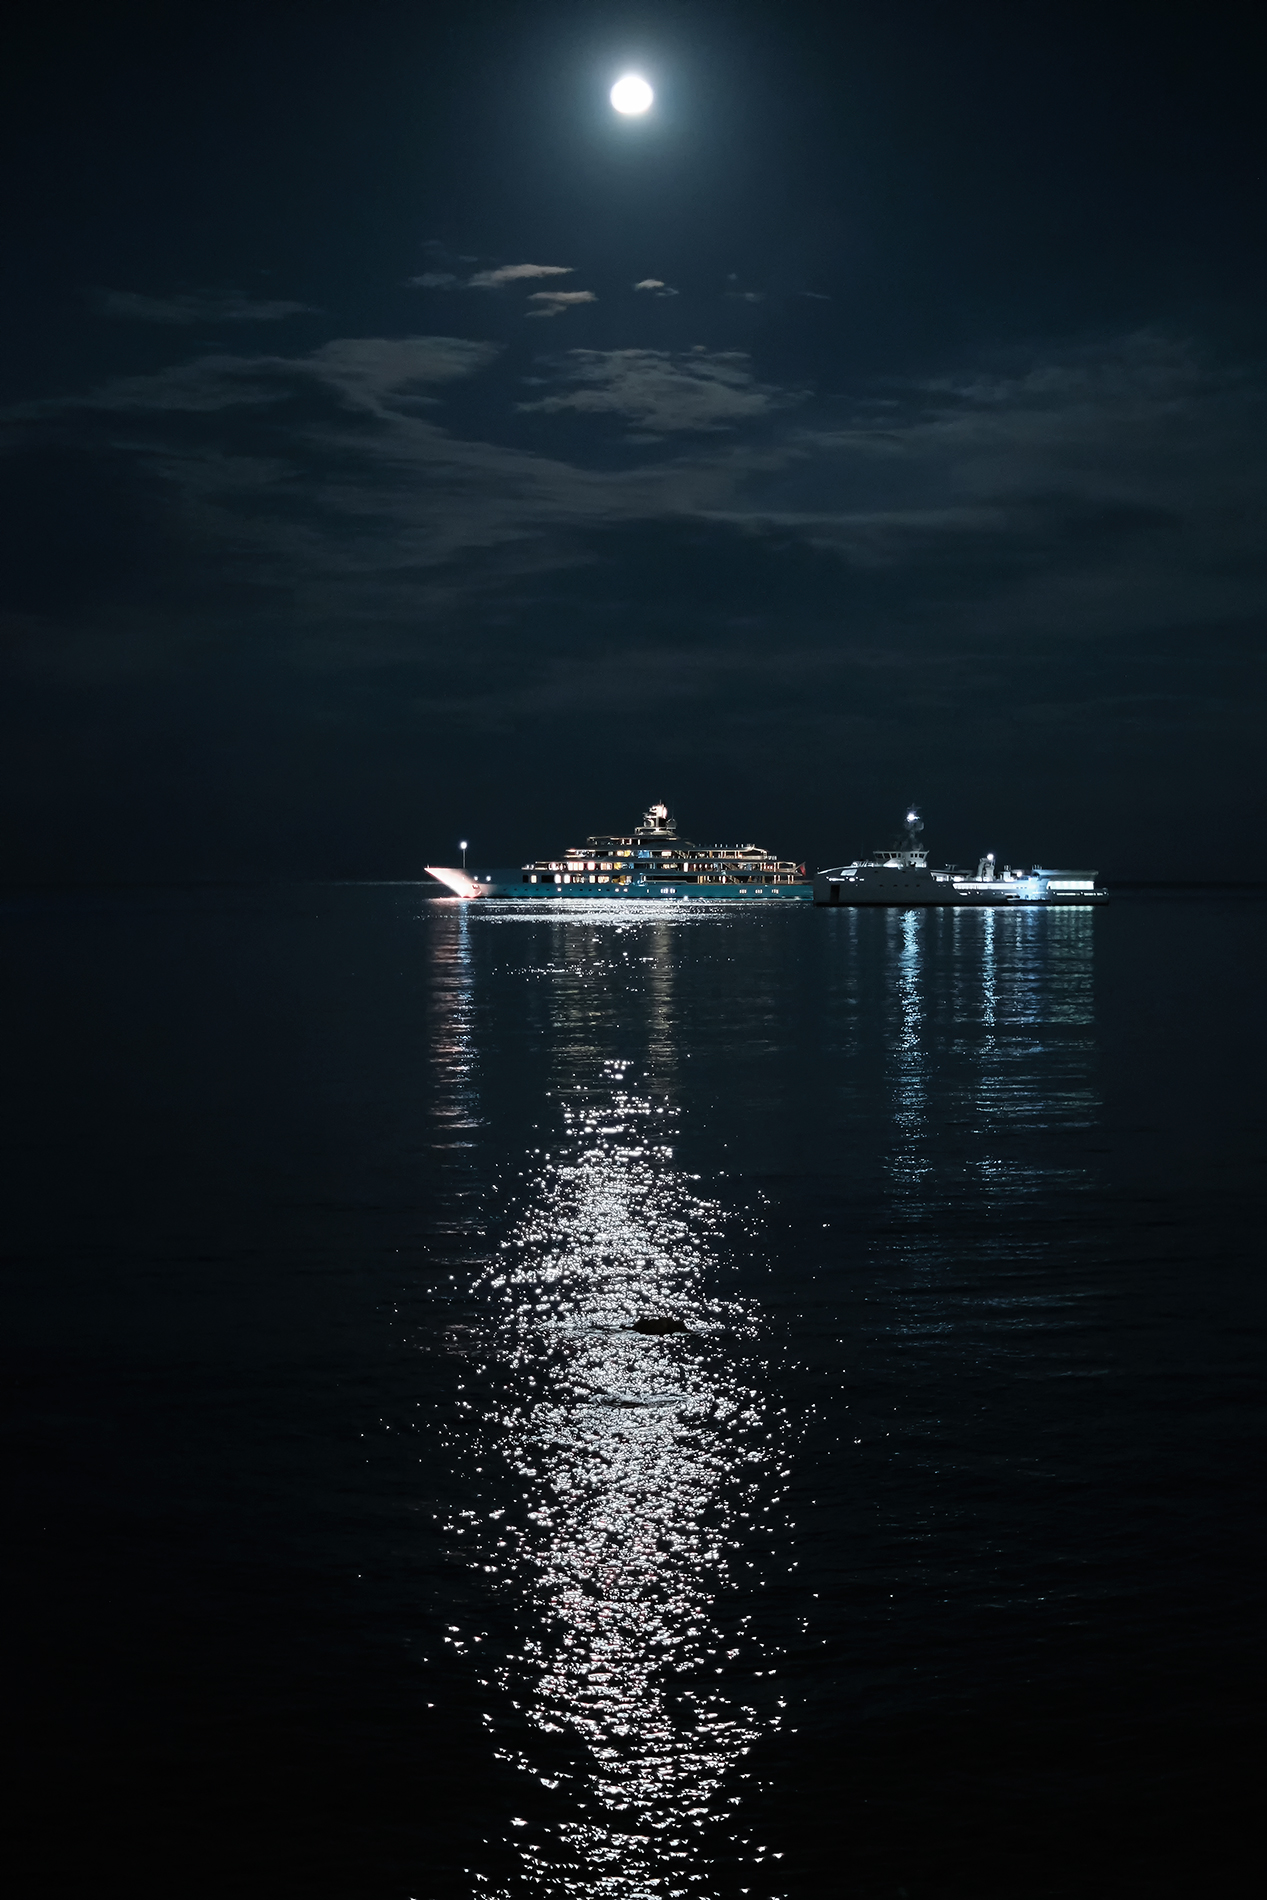 Yacht in the moonlight...